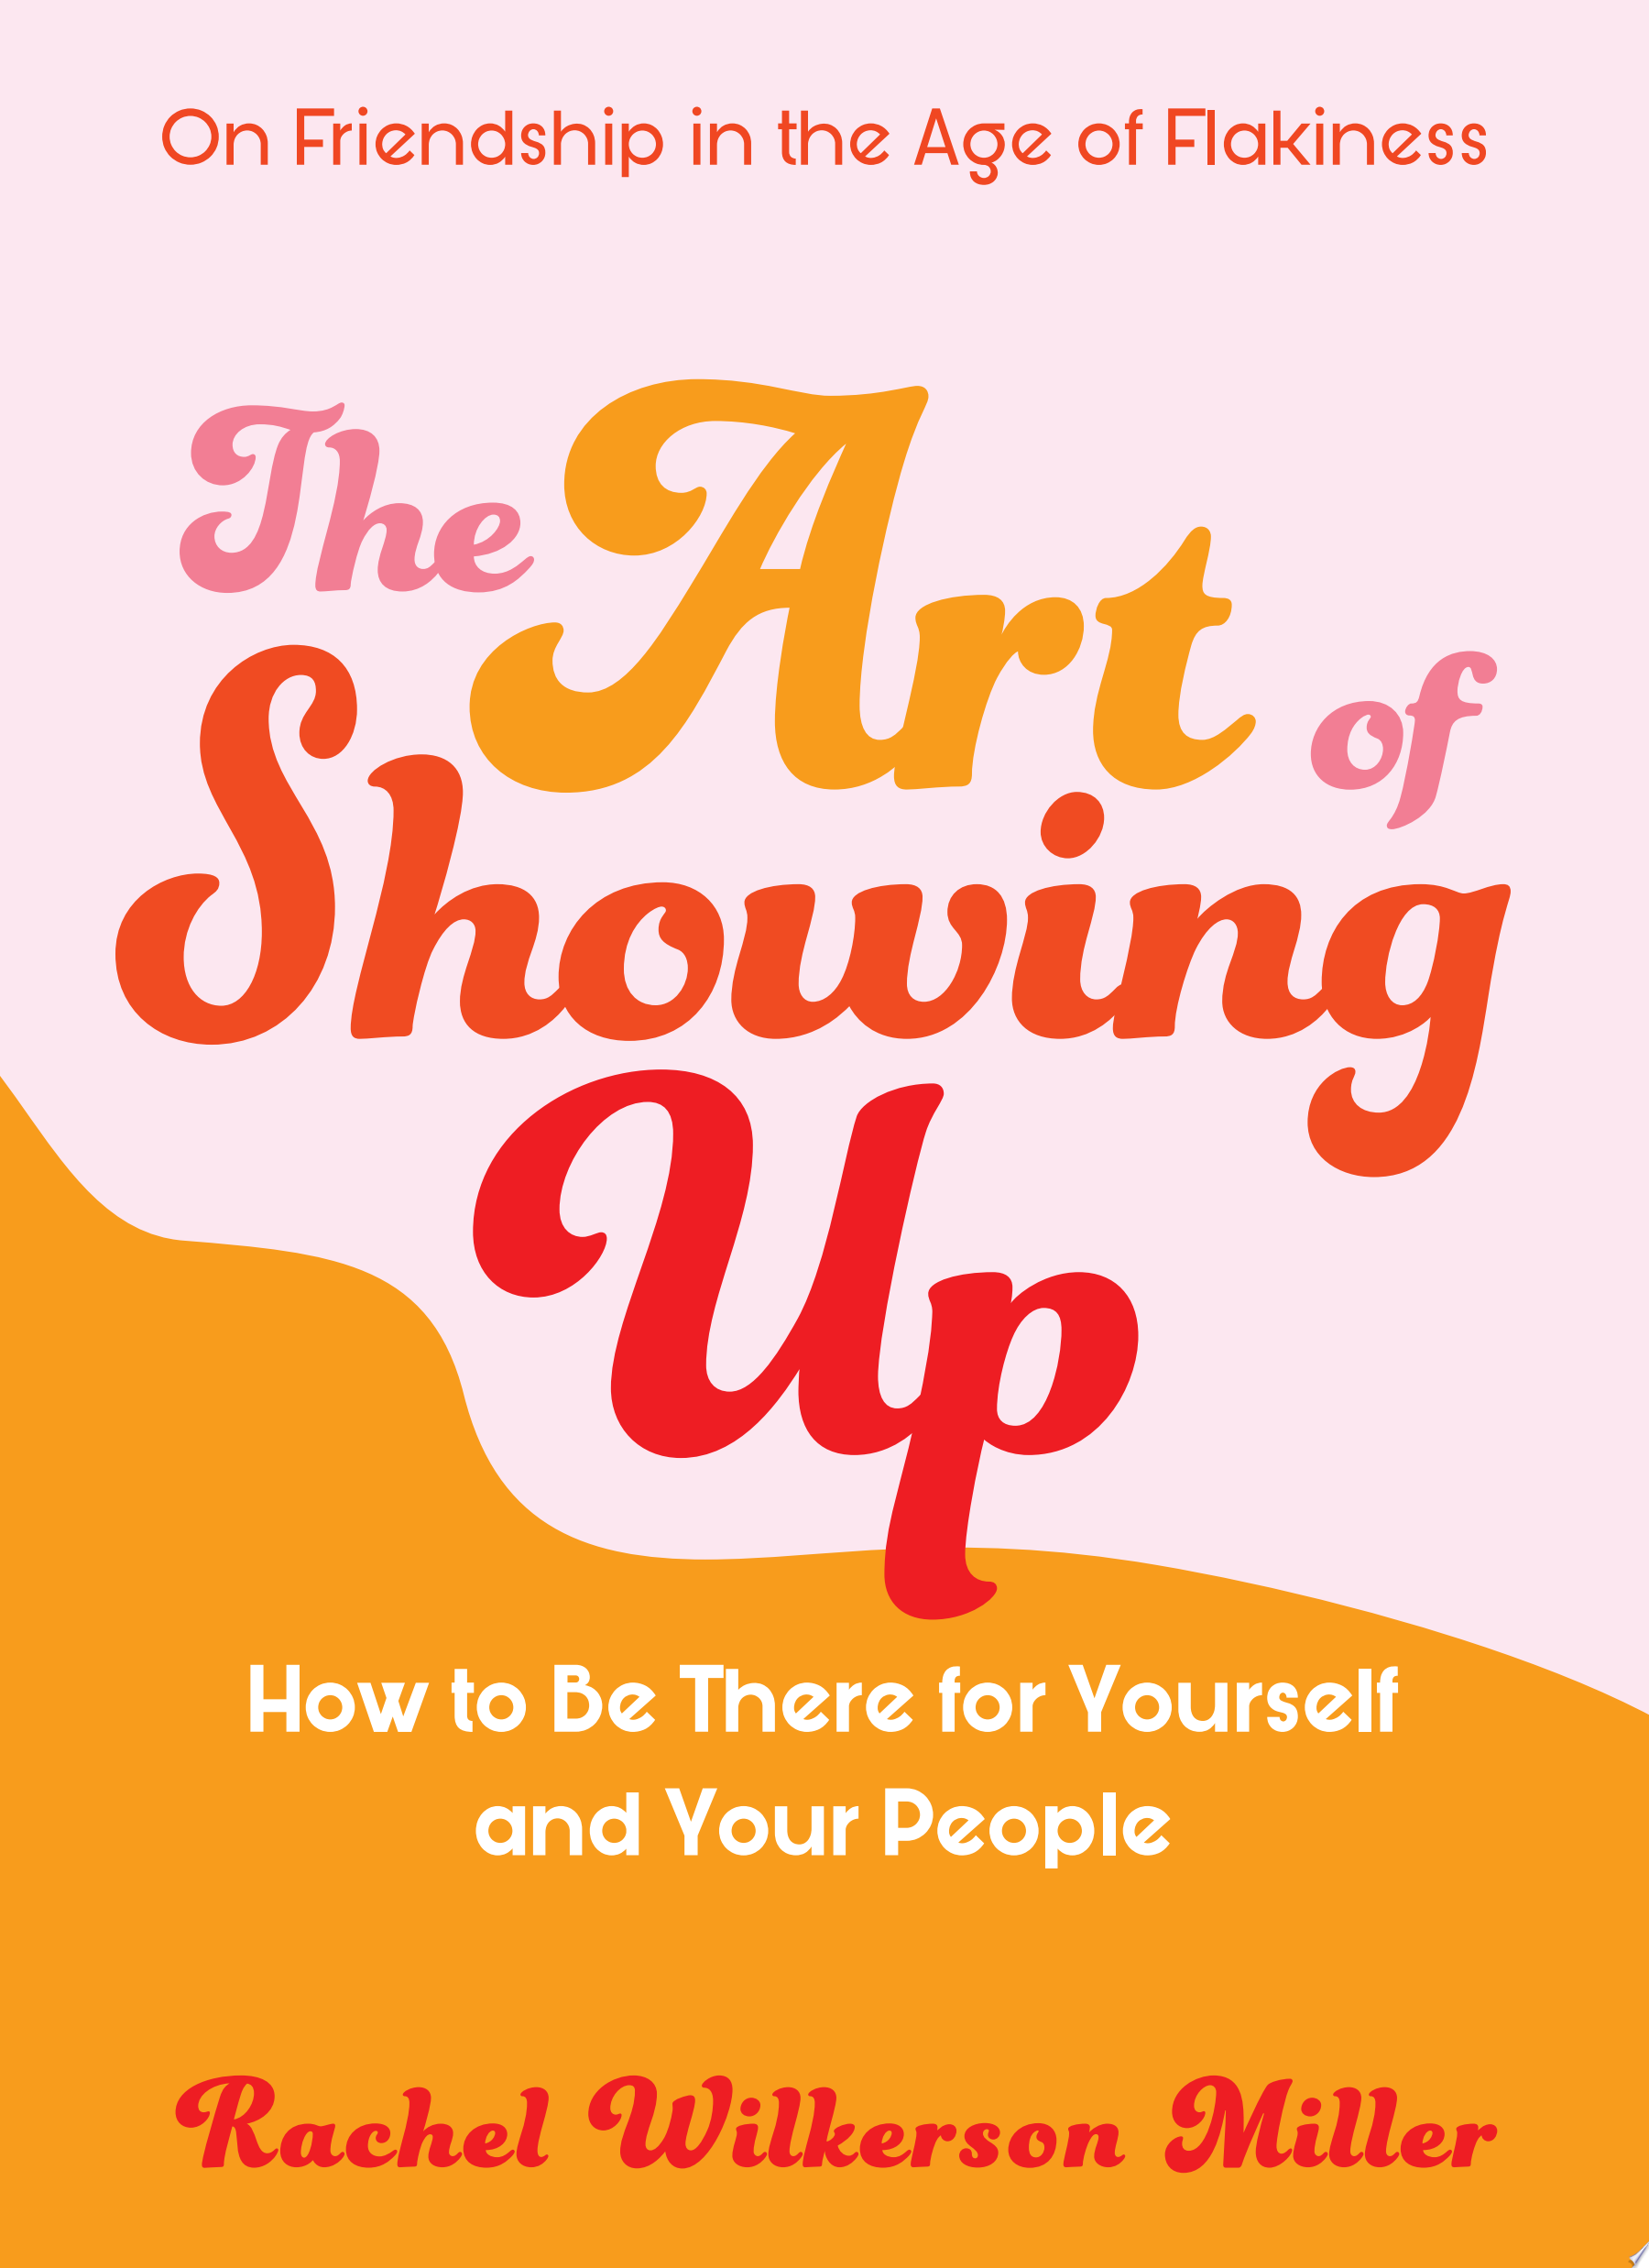 Image for "The Art of Showing Up"